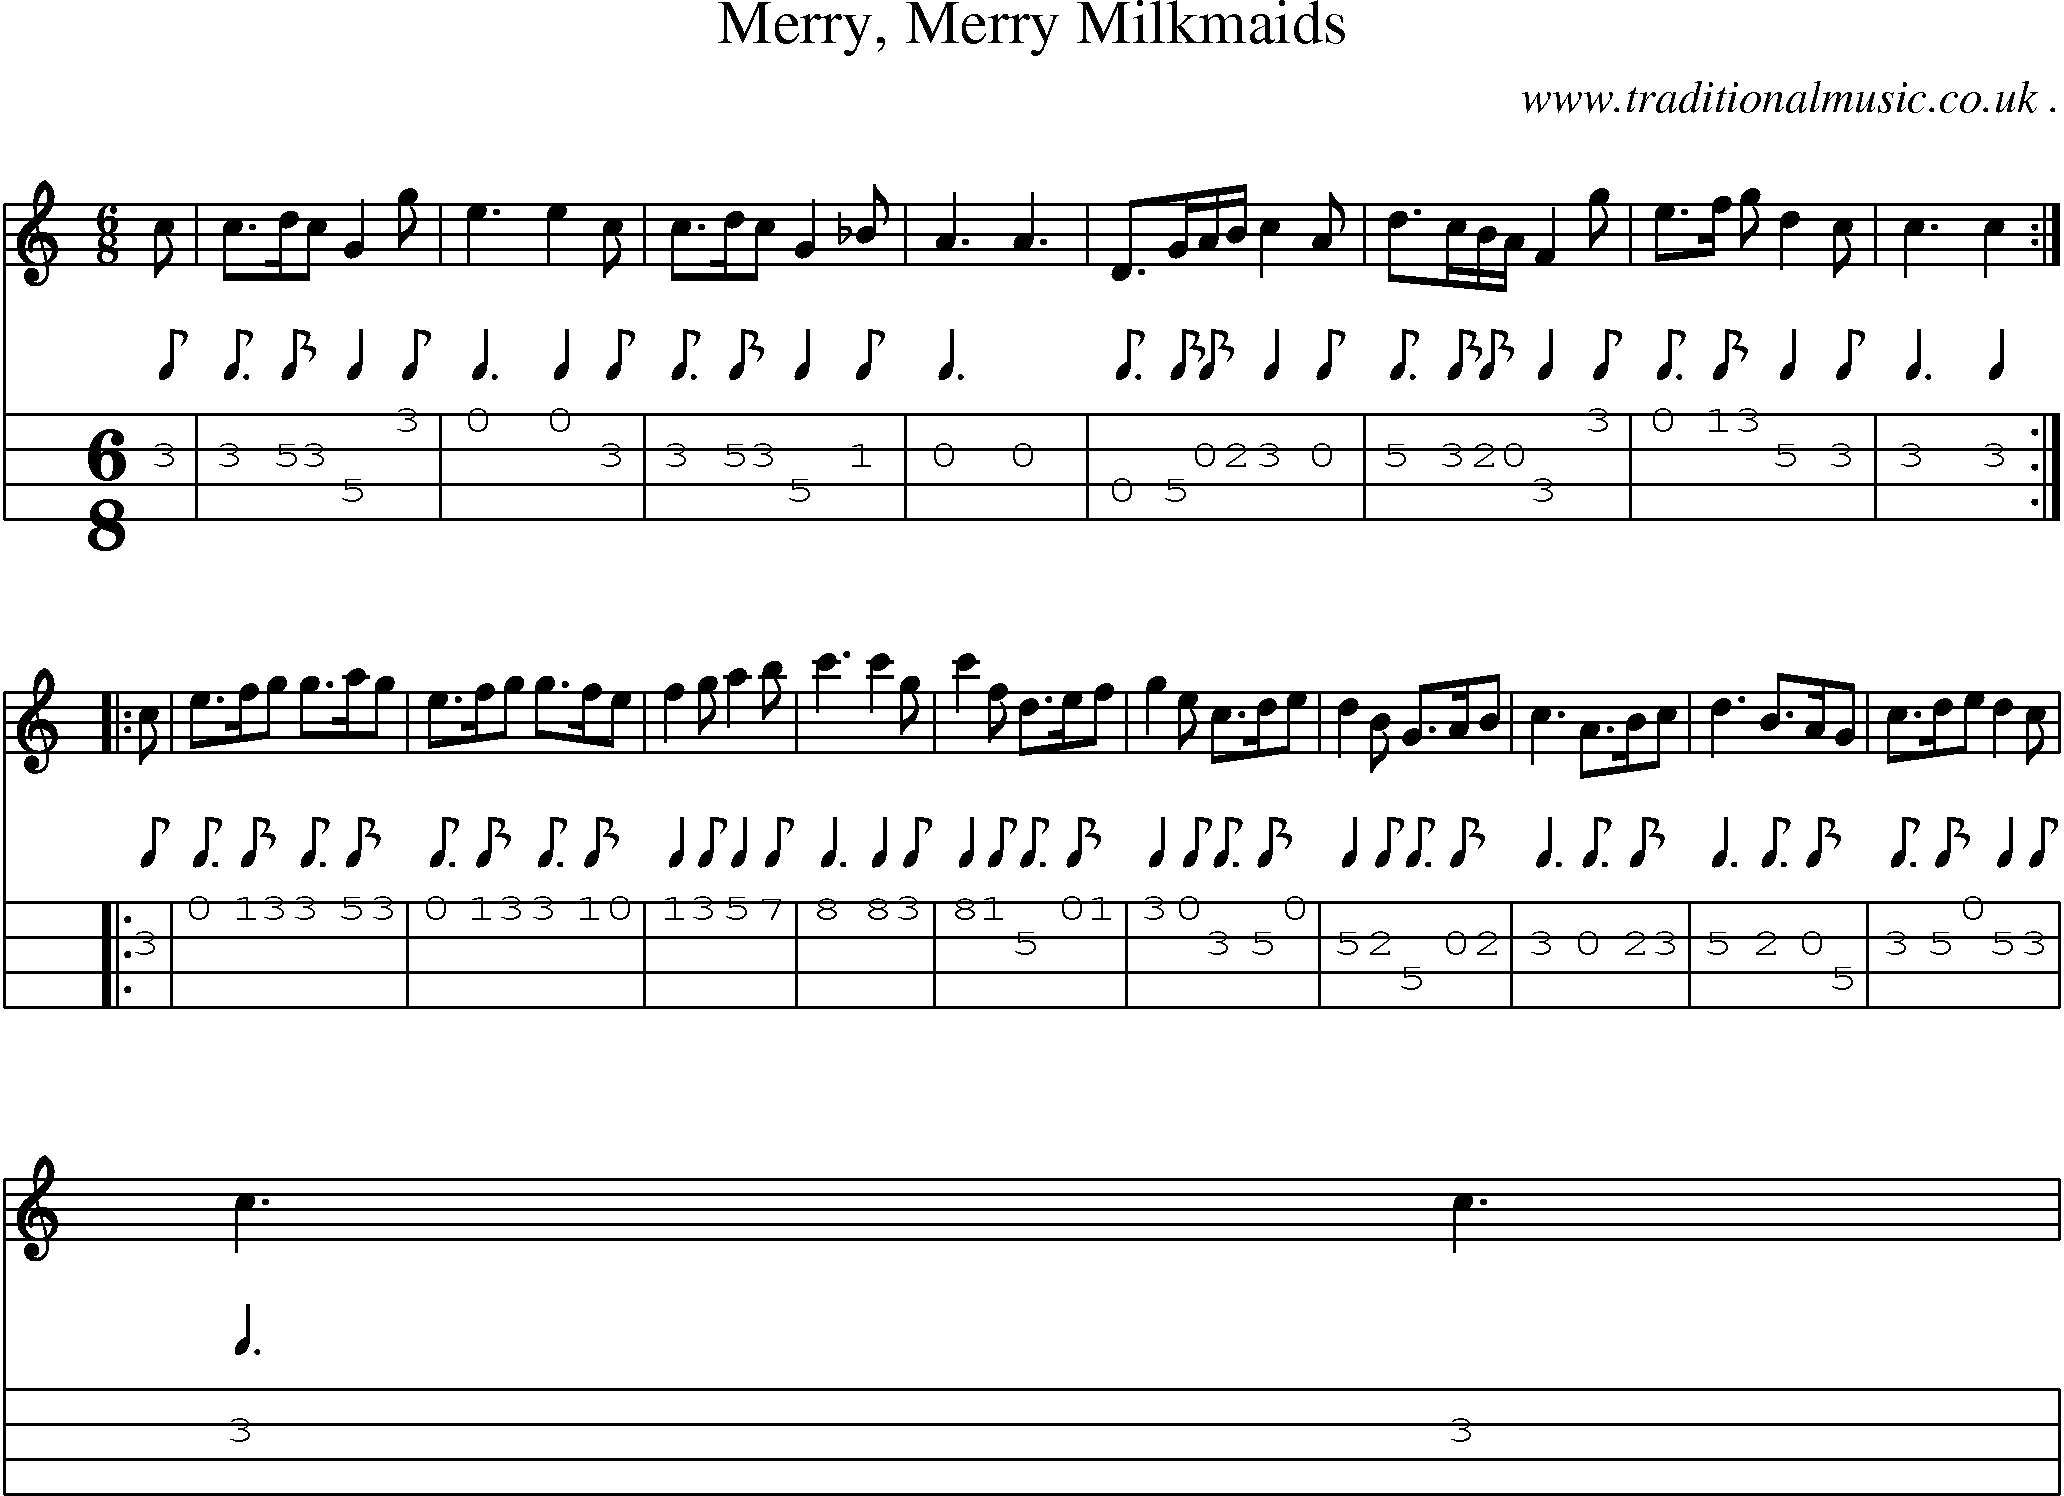 Sheet-Music and Mandolin Tabs for Merry Merry Milkmaids